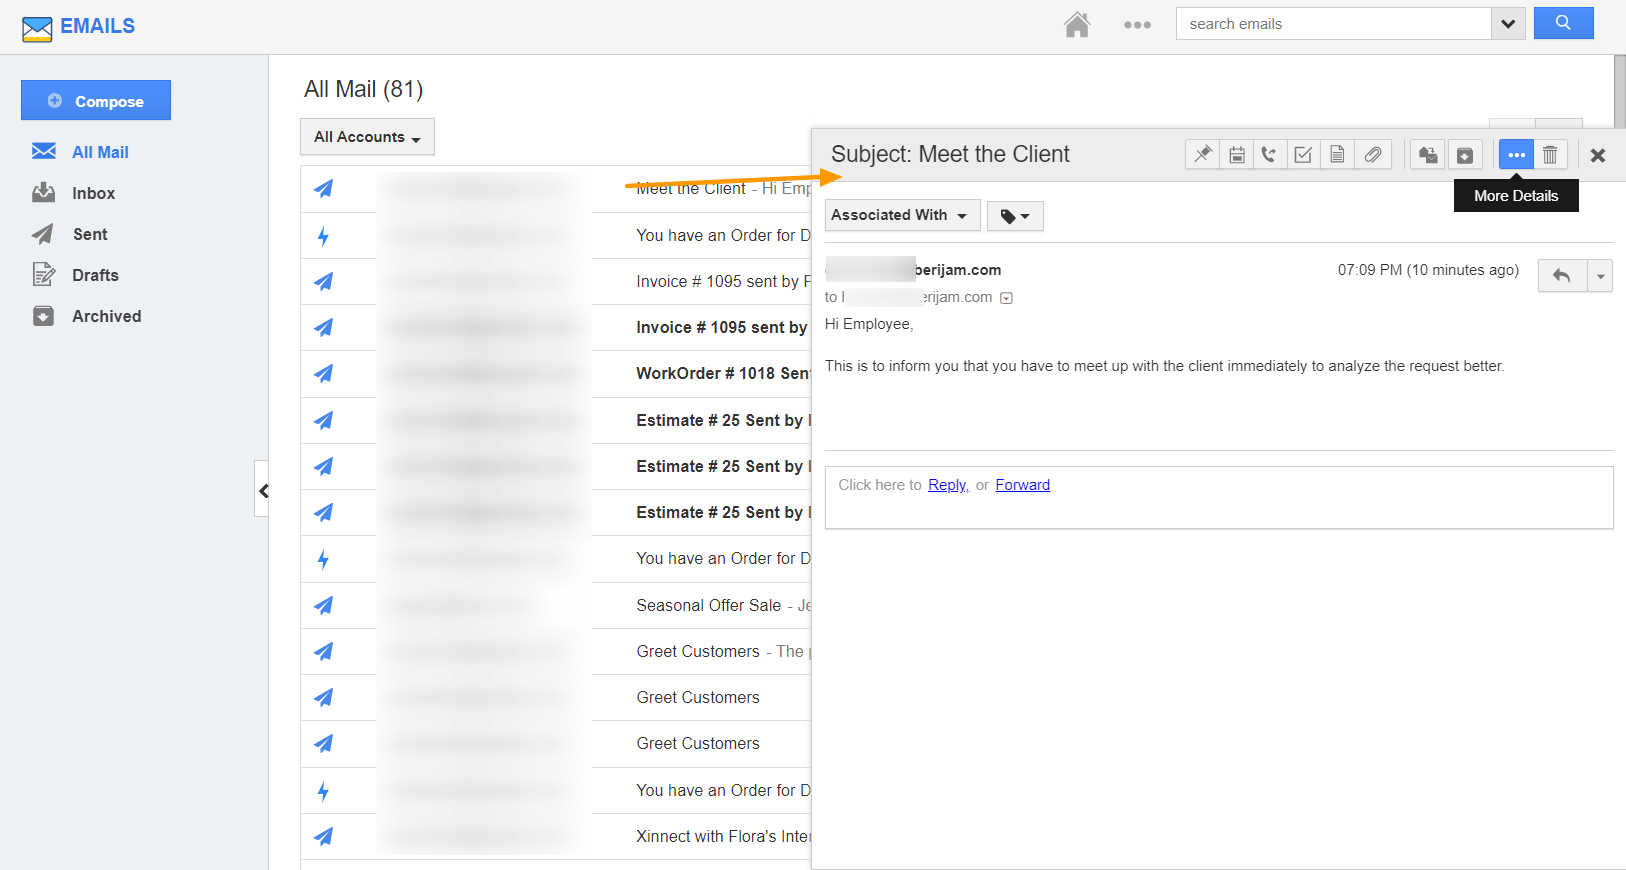 EmailsApp-SidePanelView